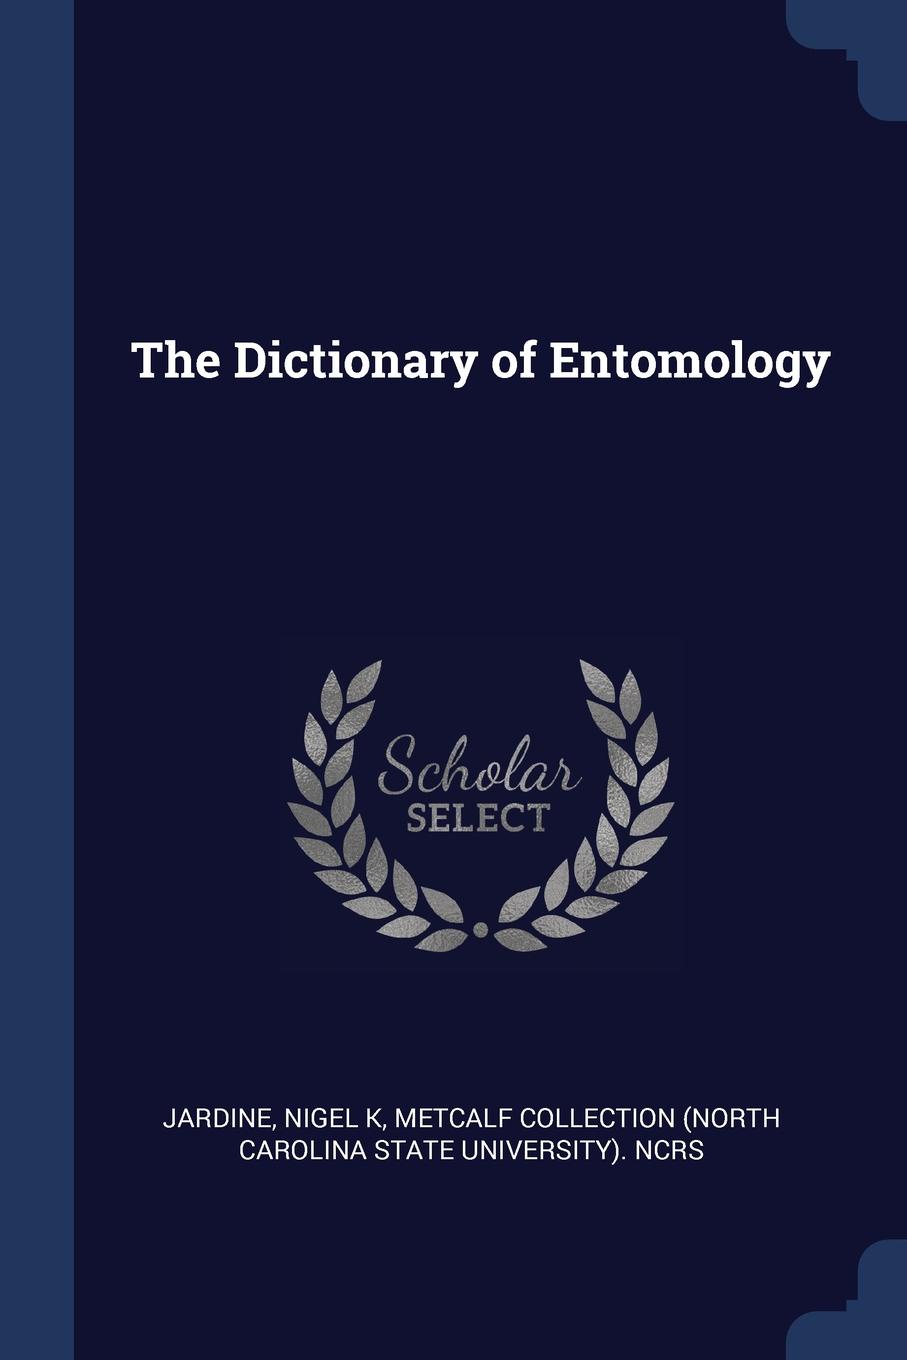 The Dictionary of Entomology